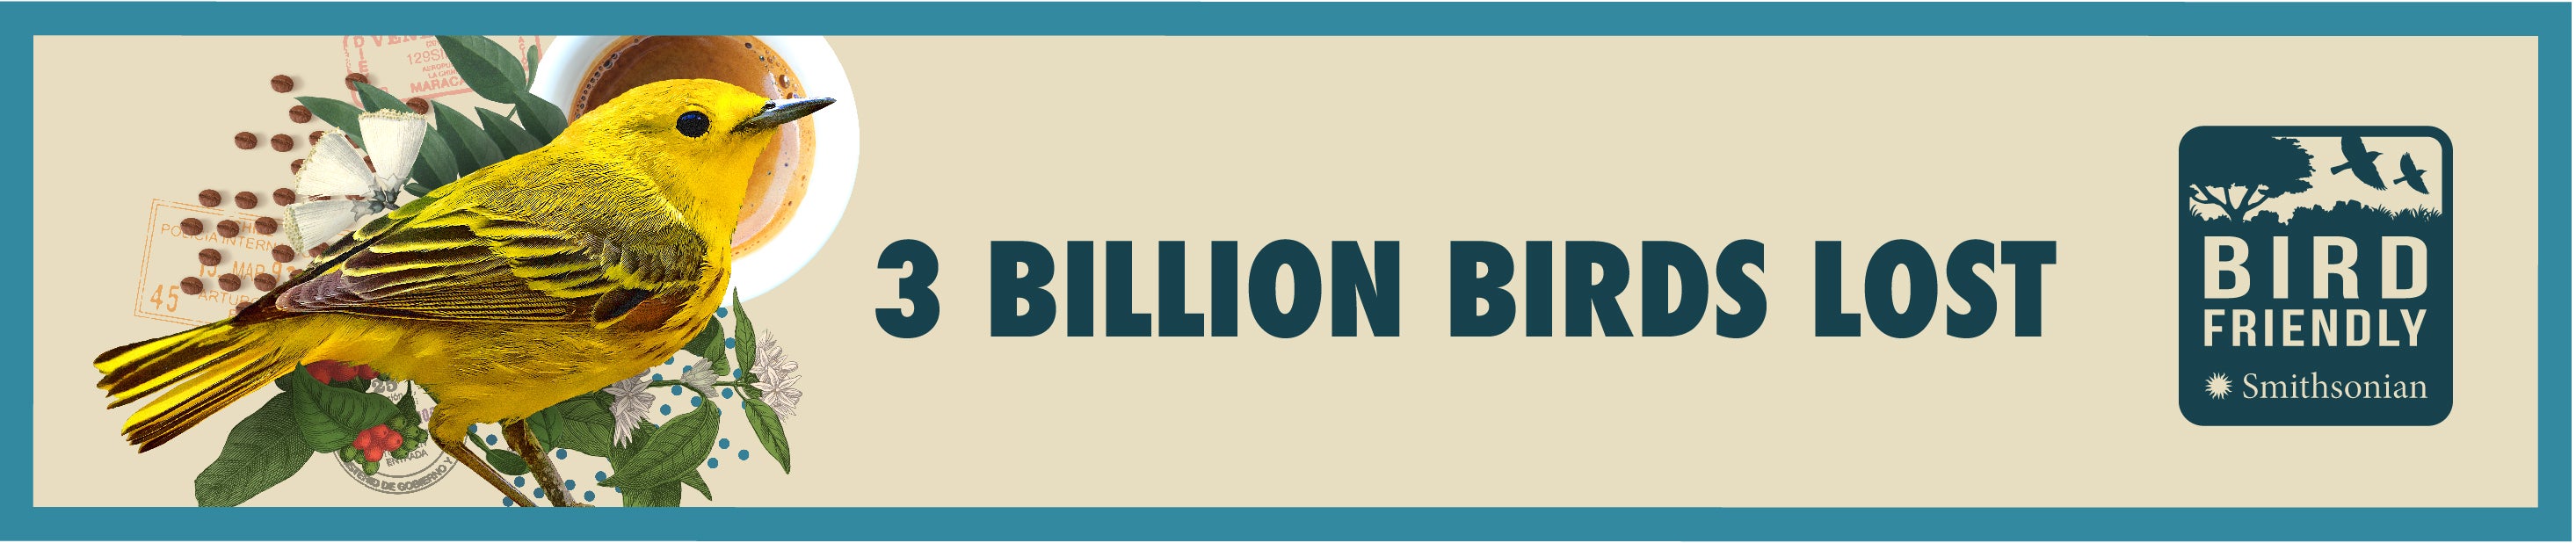 A banner with the text "3 billion birds lost" and the Smithsonian Bird Friendly logo on the right, and a yellow bird, plant trimmings, postage stamps and a cup of coffee on the left